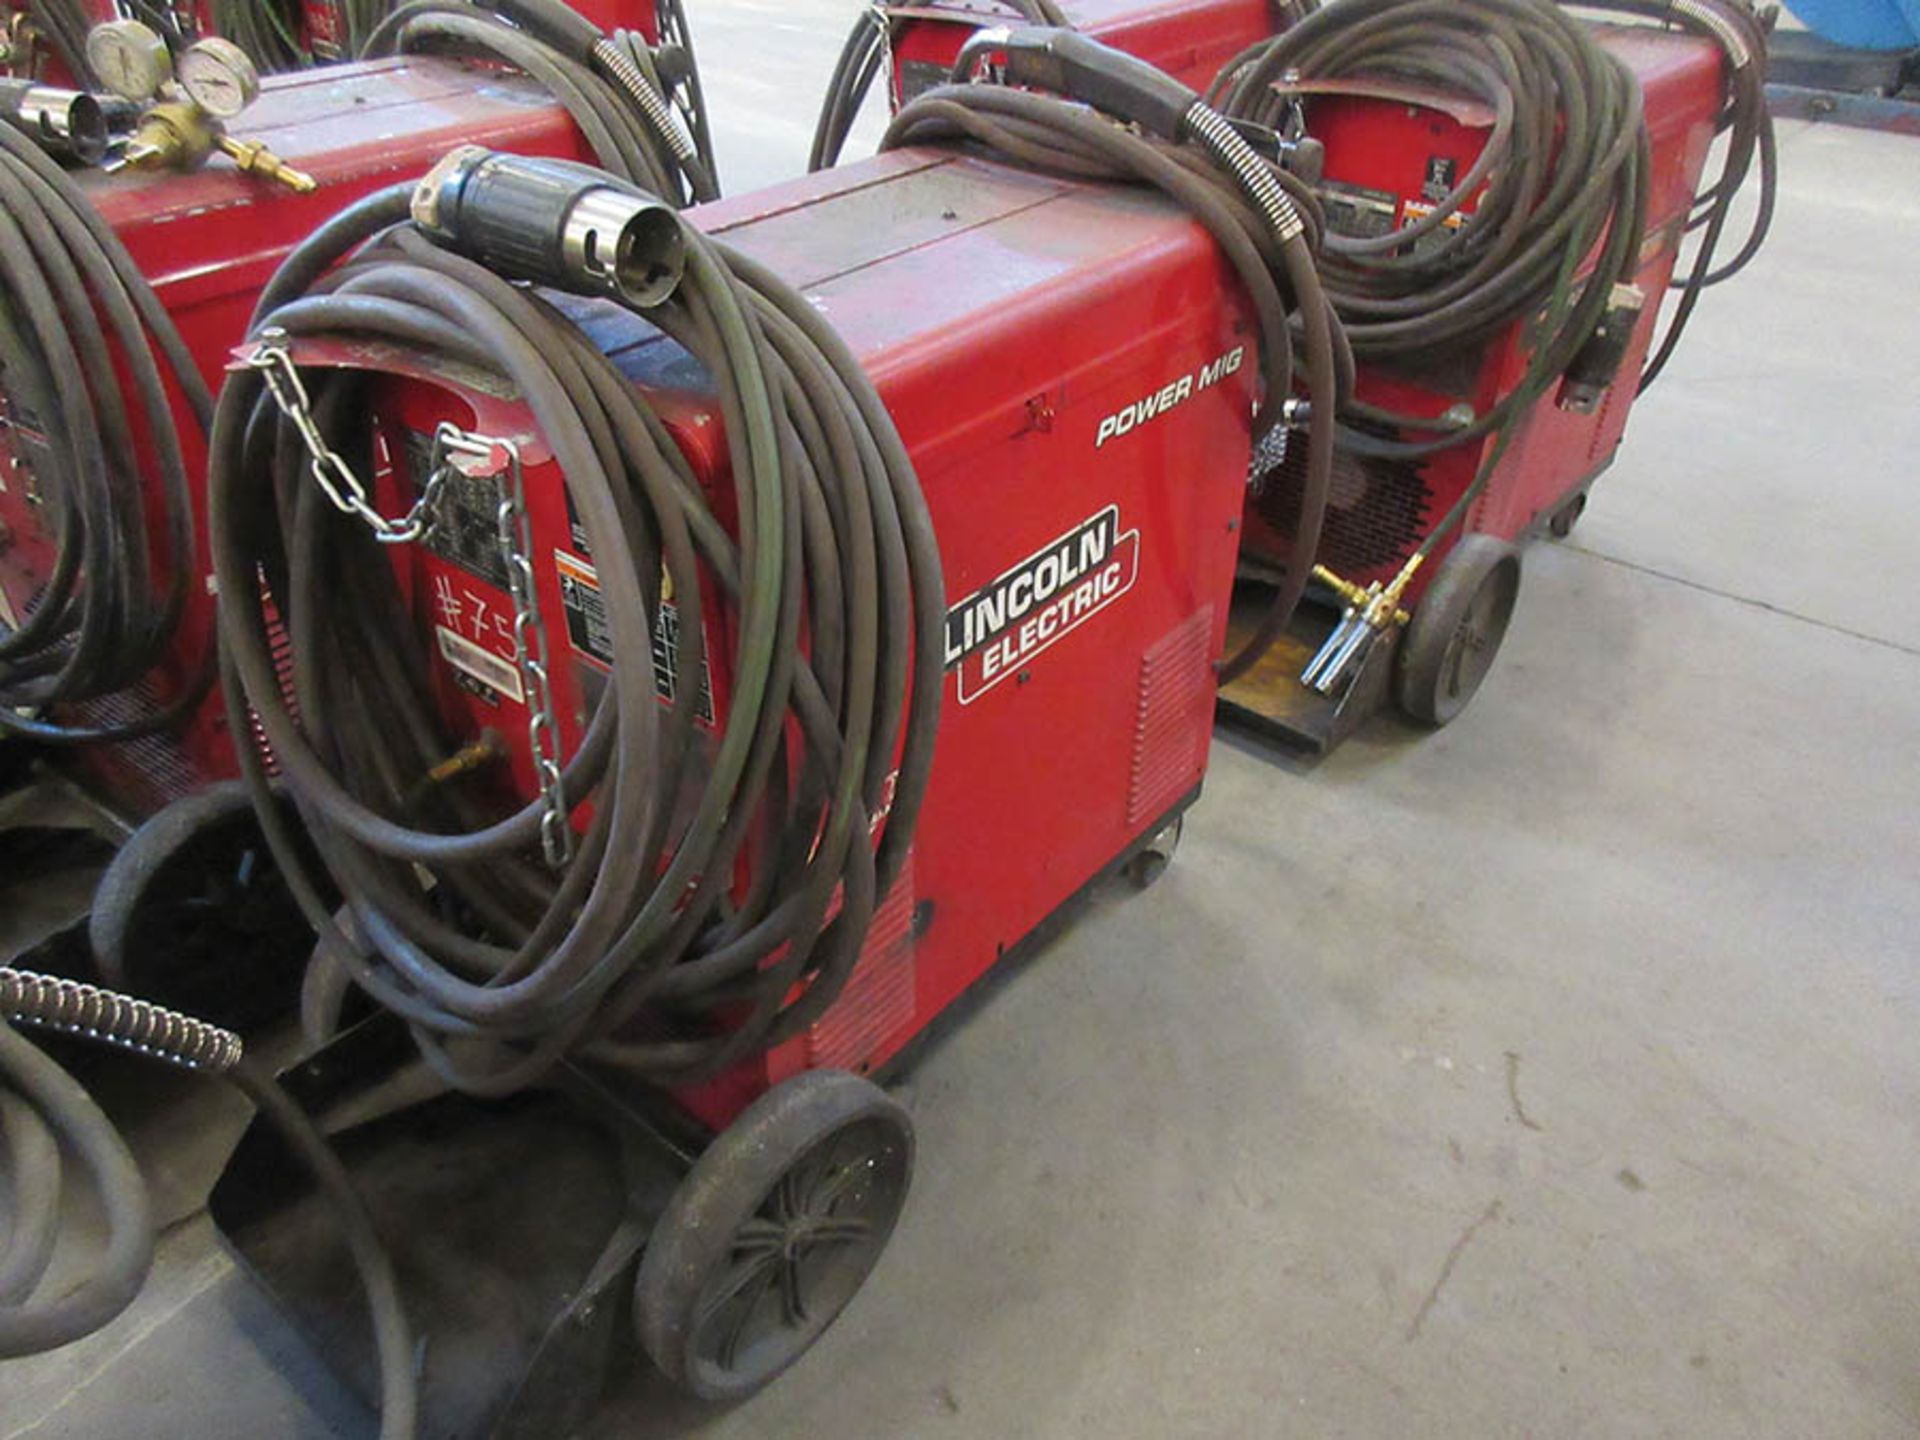 LINCOLN ELECTRIC 350MP POWER MIG WELDER WITH TWECO WELDSKILL MIG GUN, #75 - Image 2 of 3